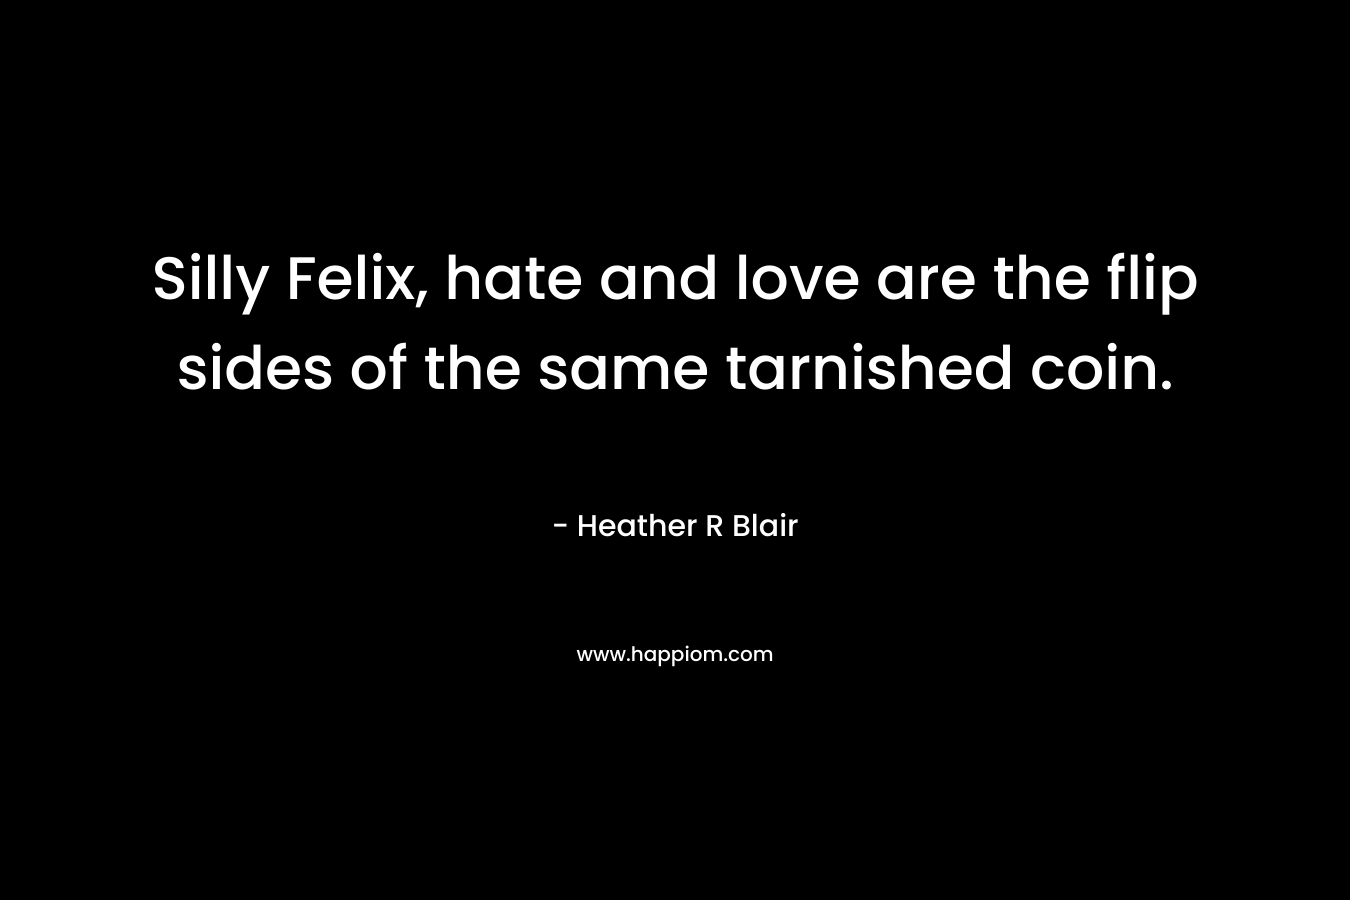 Silly Felix, hate and love are the flip sides of the same tarnished coin. – Heather R Blair